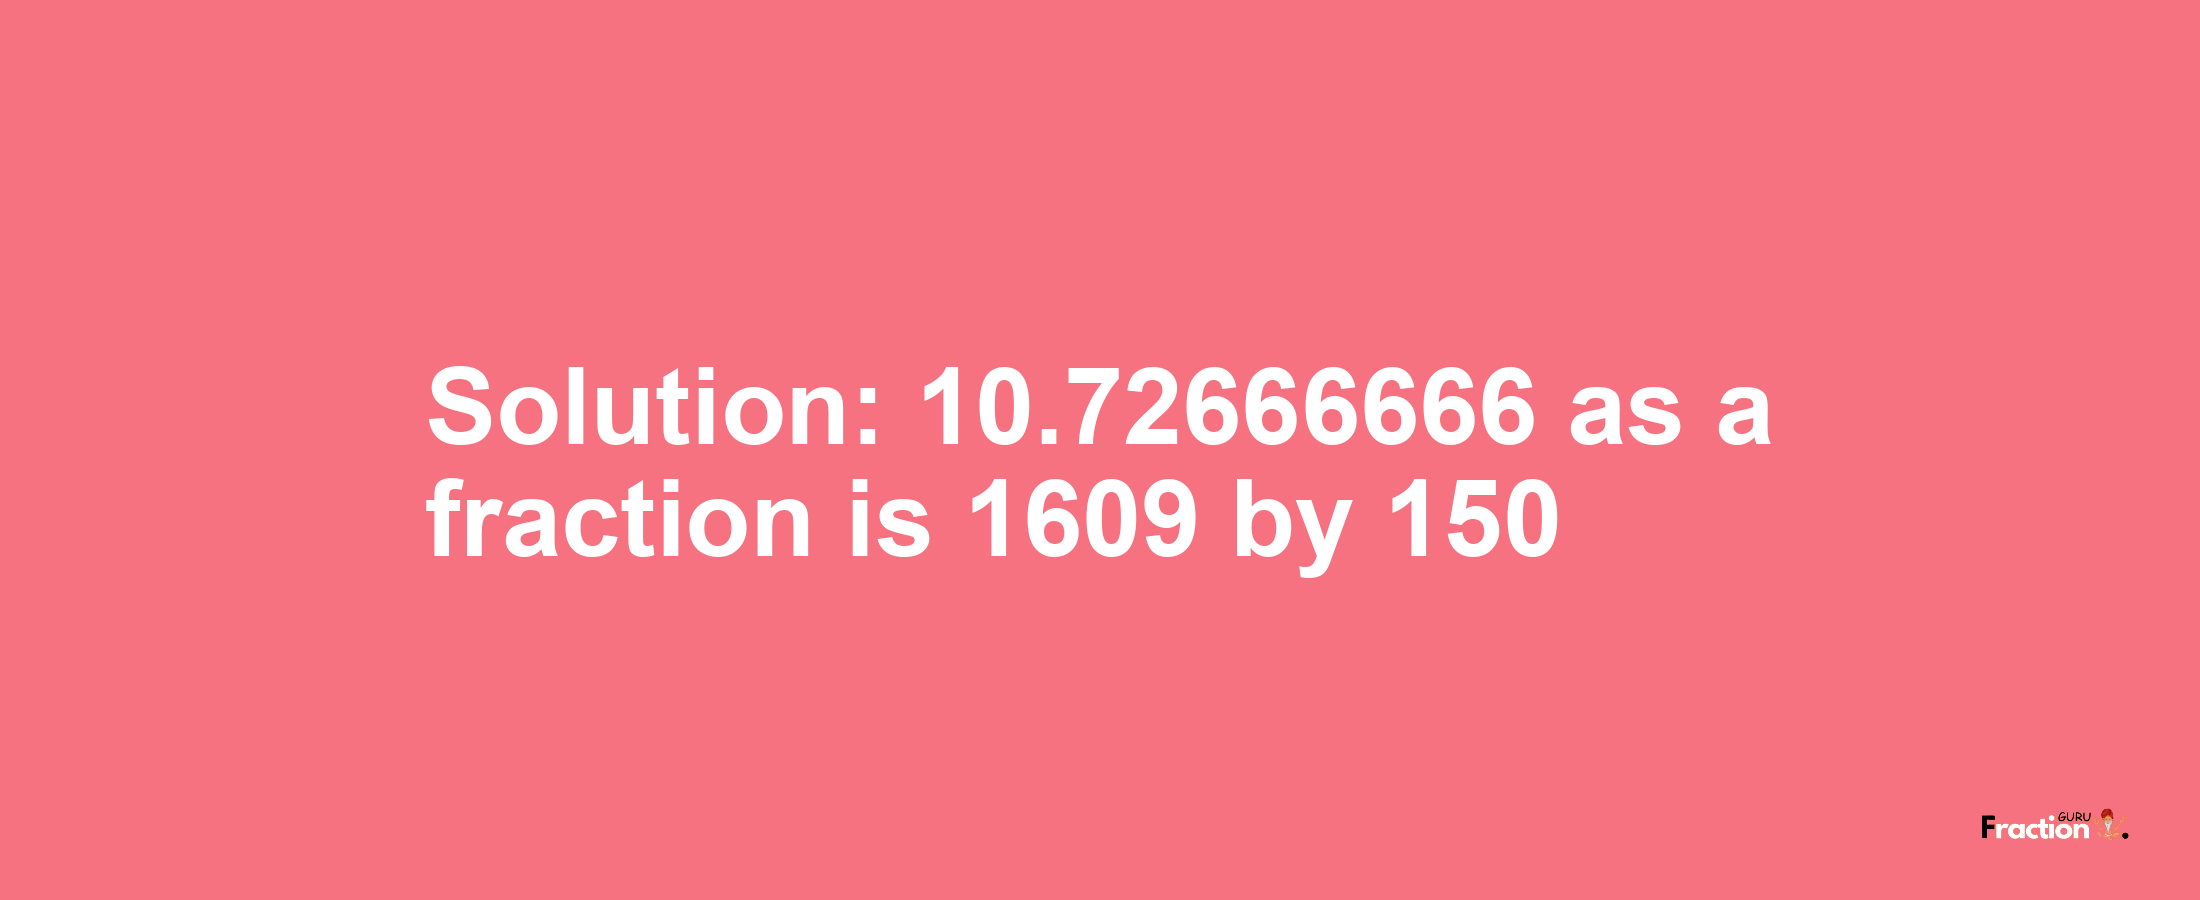 Solution:10.72666666 as a fraction is 1609/150